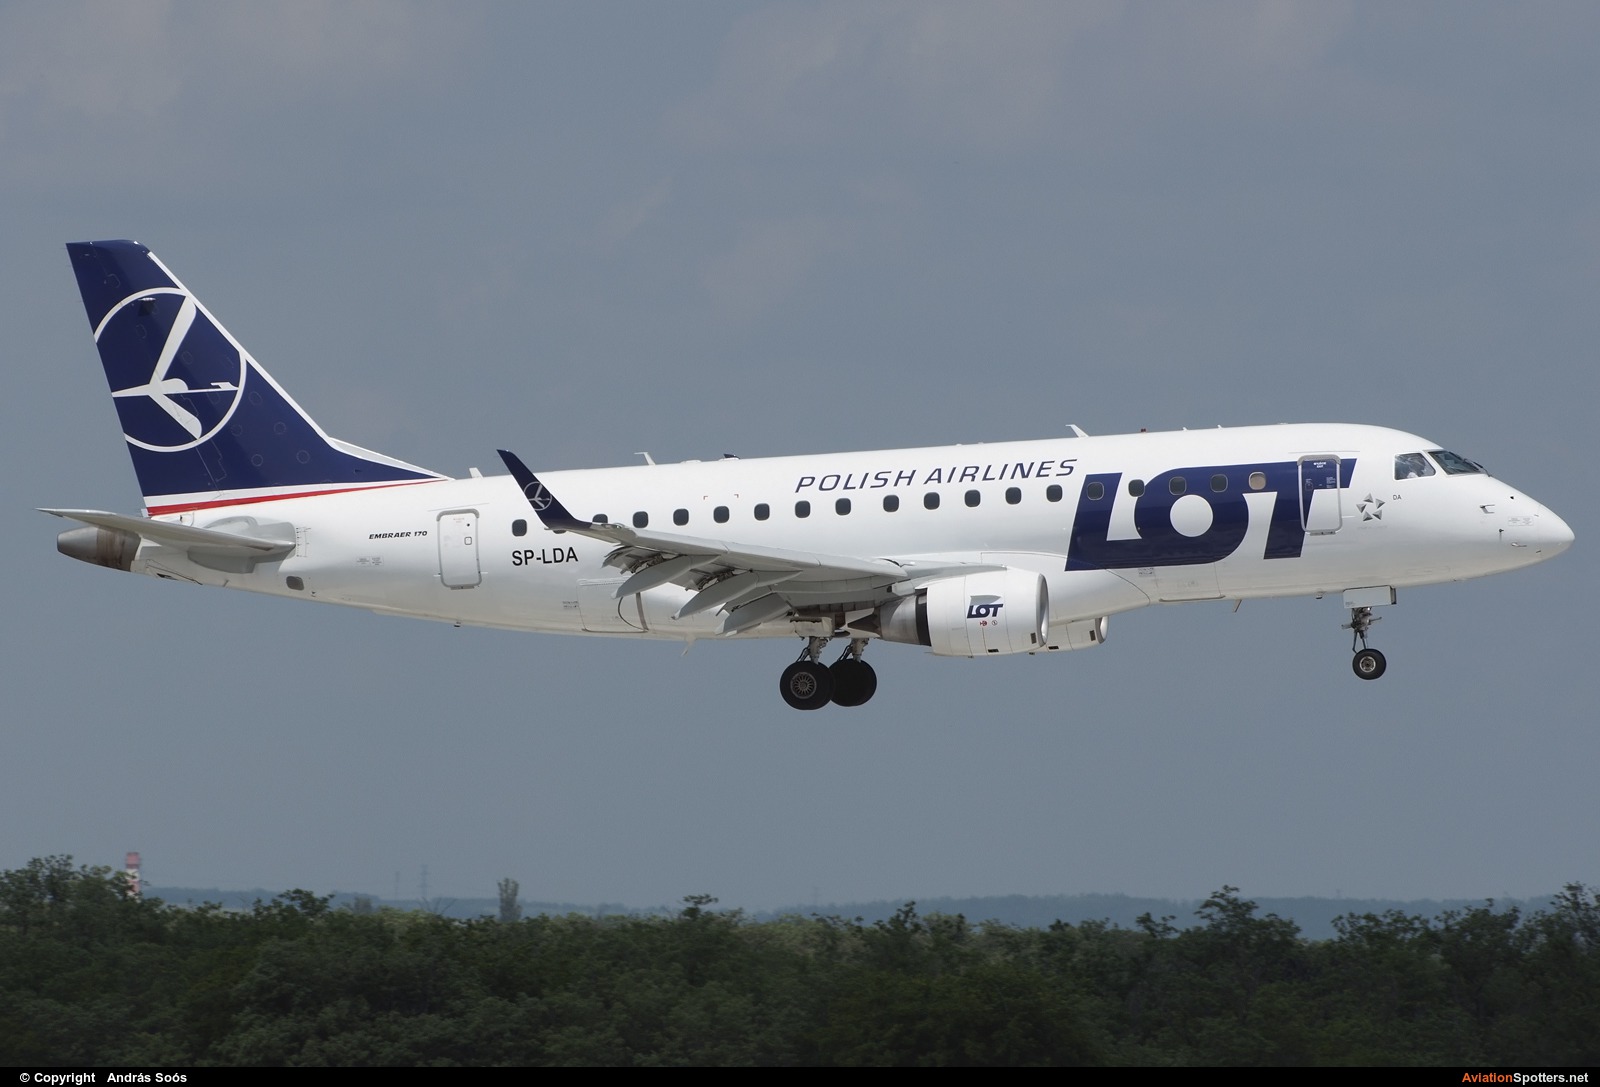 LOT - Polish Airlines  -  170  (SP-LDA) By András Soós (sas1965)